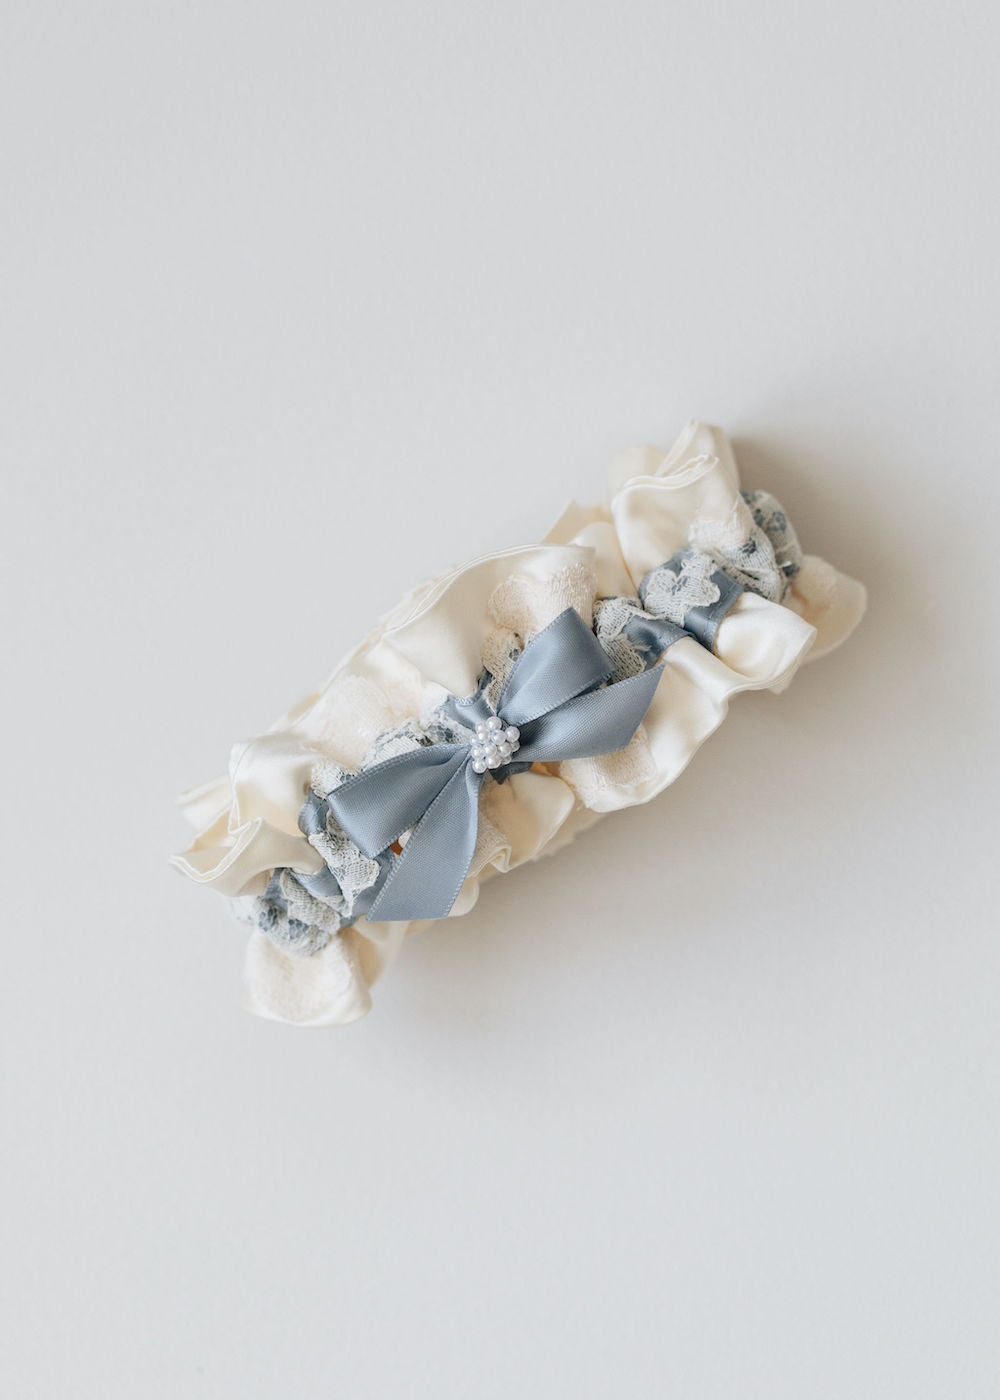 how to use great grandmother's satin wedding dress material - heirloom wedding garter with pearls & something blue handmade by The Garter Girl